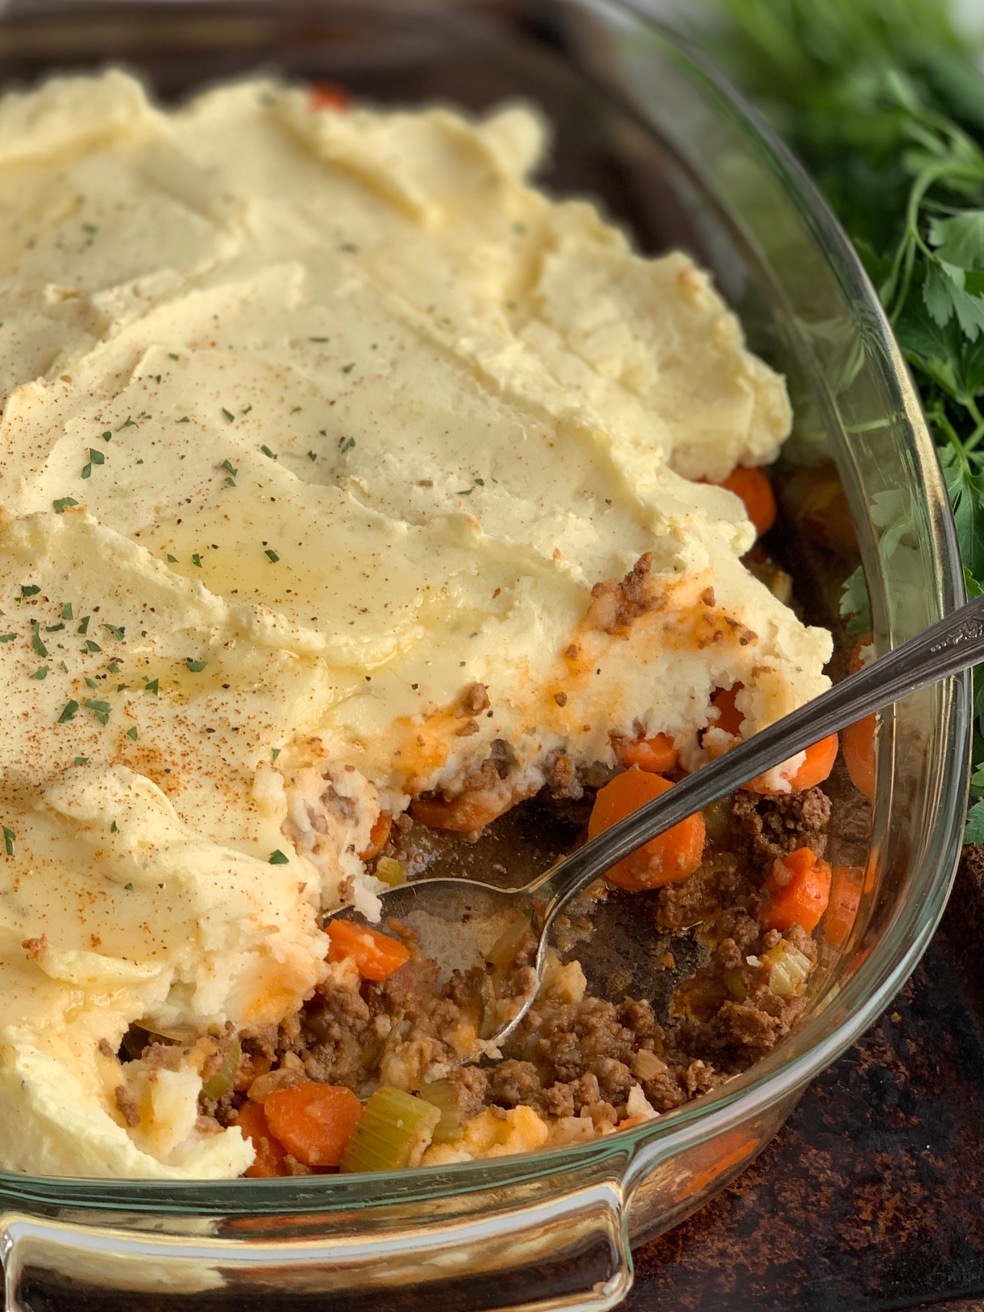 A 9x13-inch glass baking pan with a seasoned ground beef, carrot, and celery mixture topped with creamy, thick mashed potatoes. Melted dairy free butter and little fresh parsley specks are on top of the mashed potatoes. A spoon has scooped out some of the shepherd's pie. 